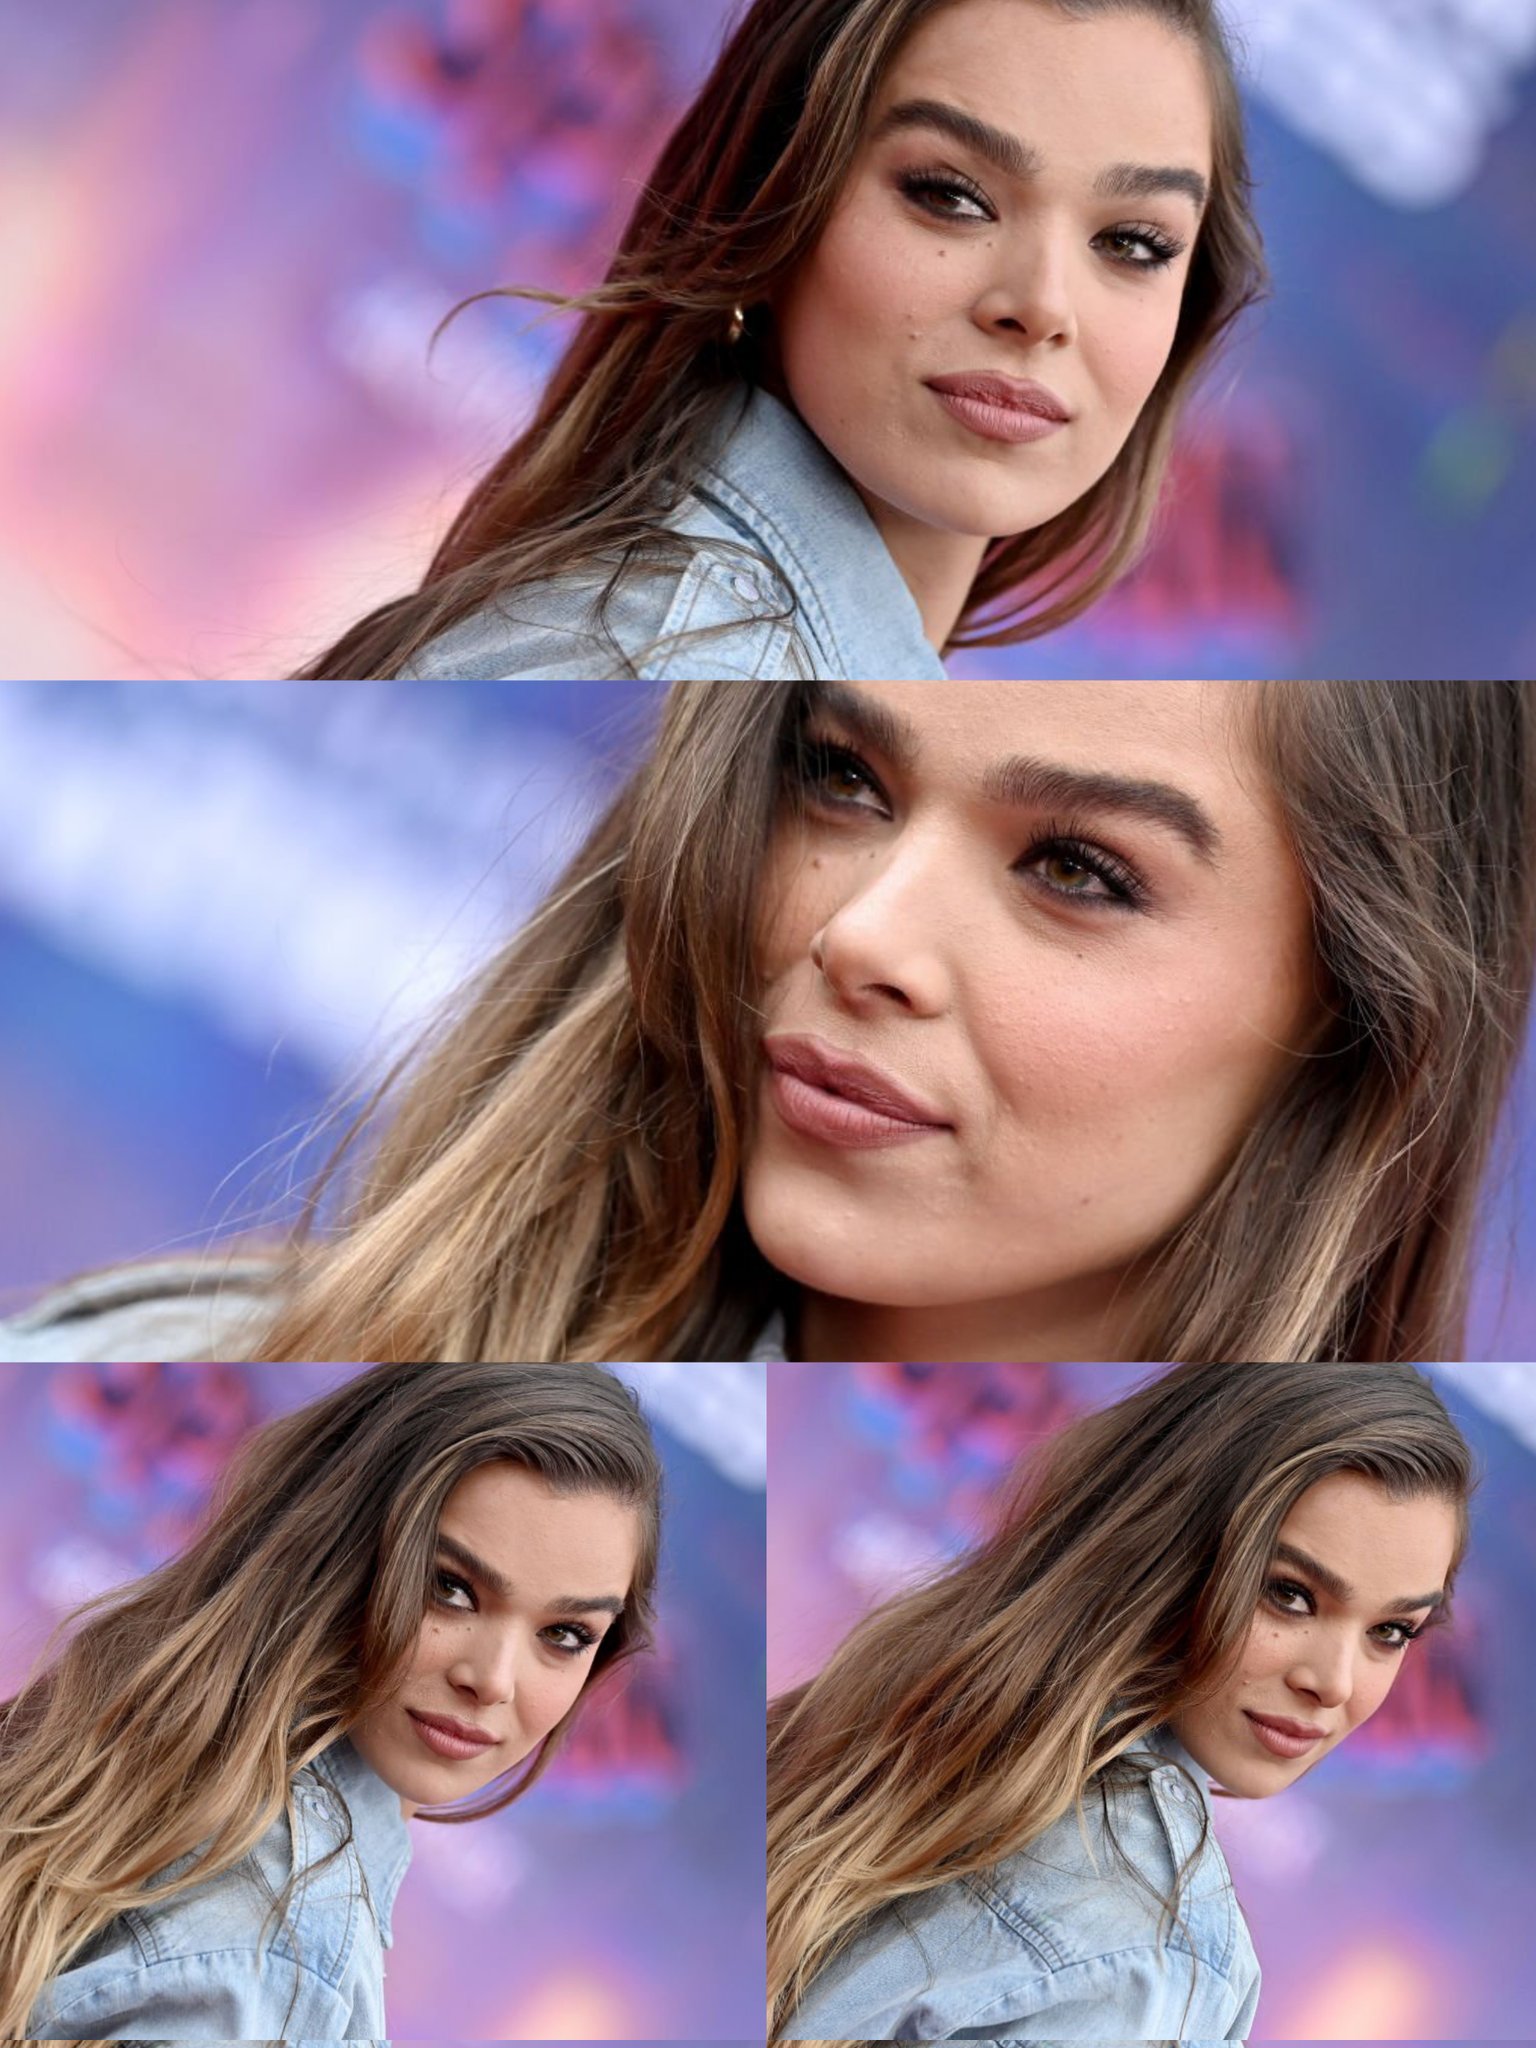 Hailee Steinfeld: Age, net worth, relationship, career, family and more